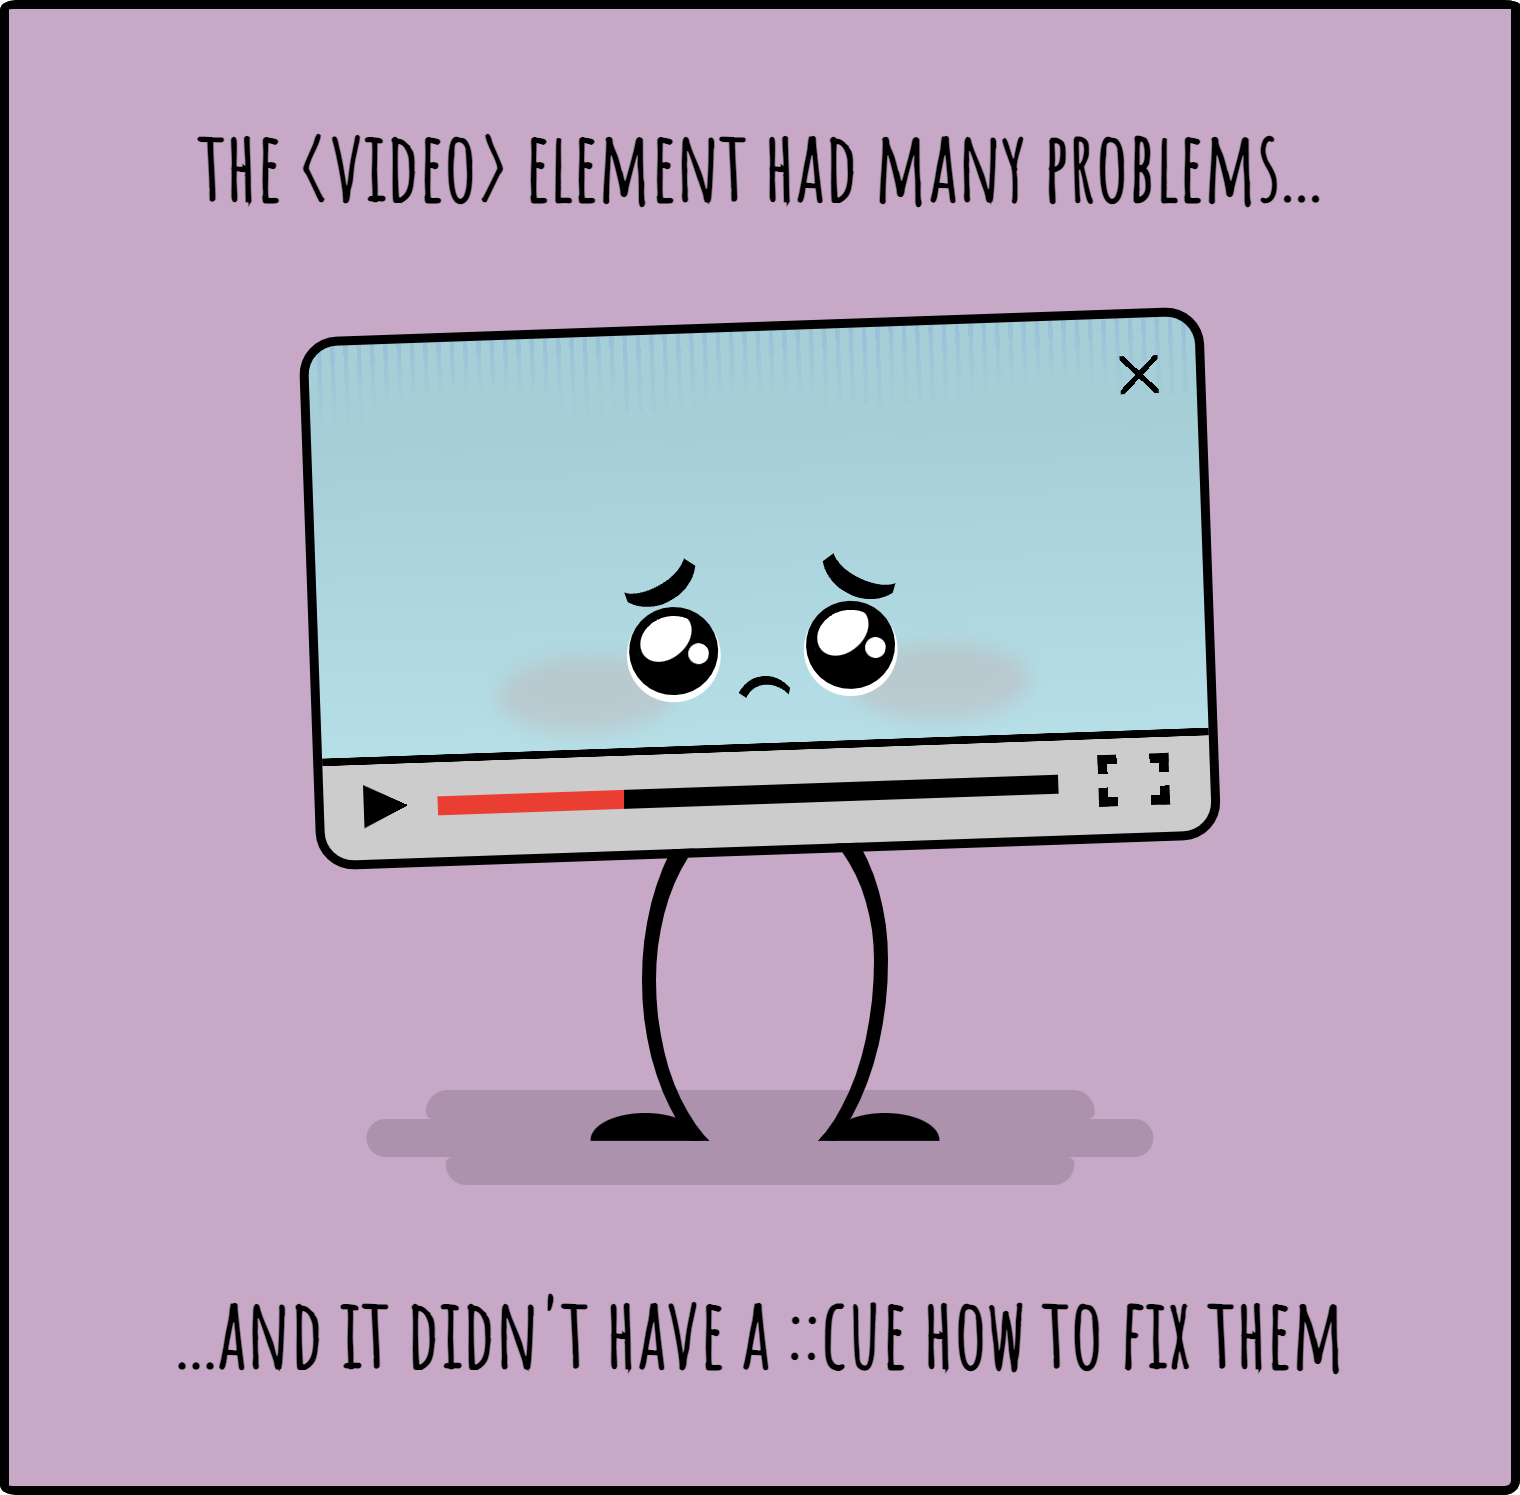 Cartoon of a sad looking video player with the text: the video element had many problems... and it didn't have a ::cue how to fix them